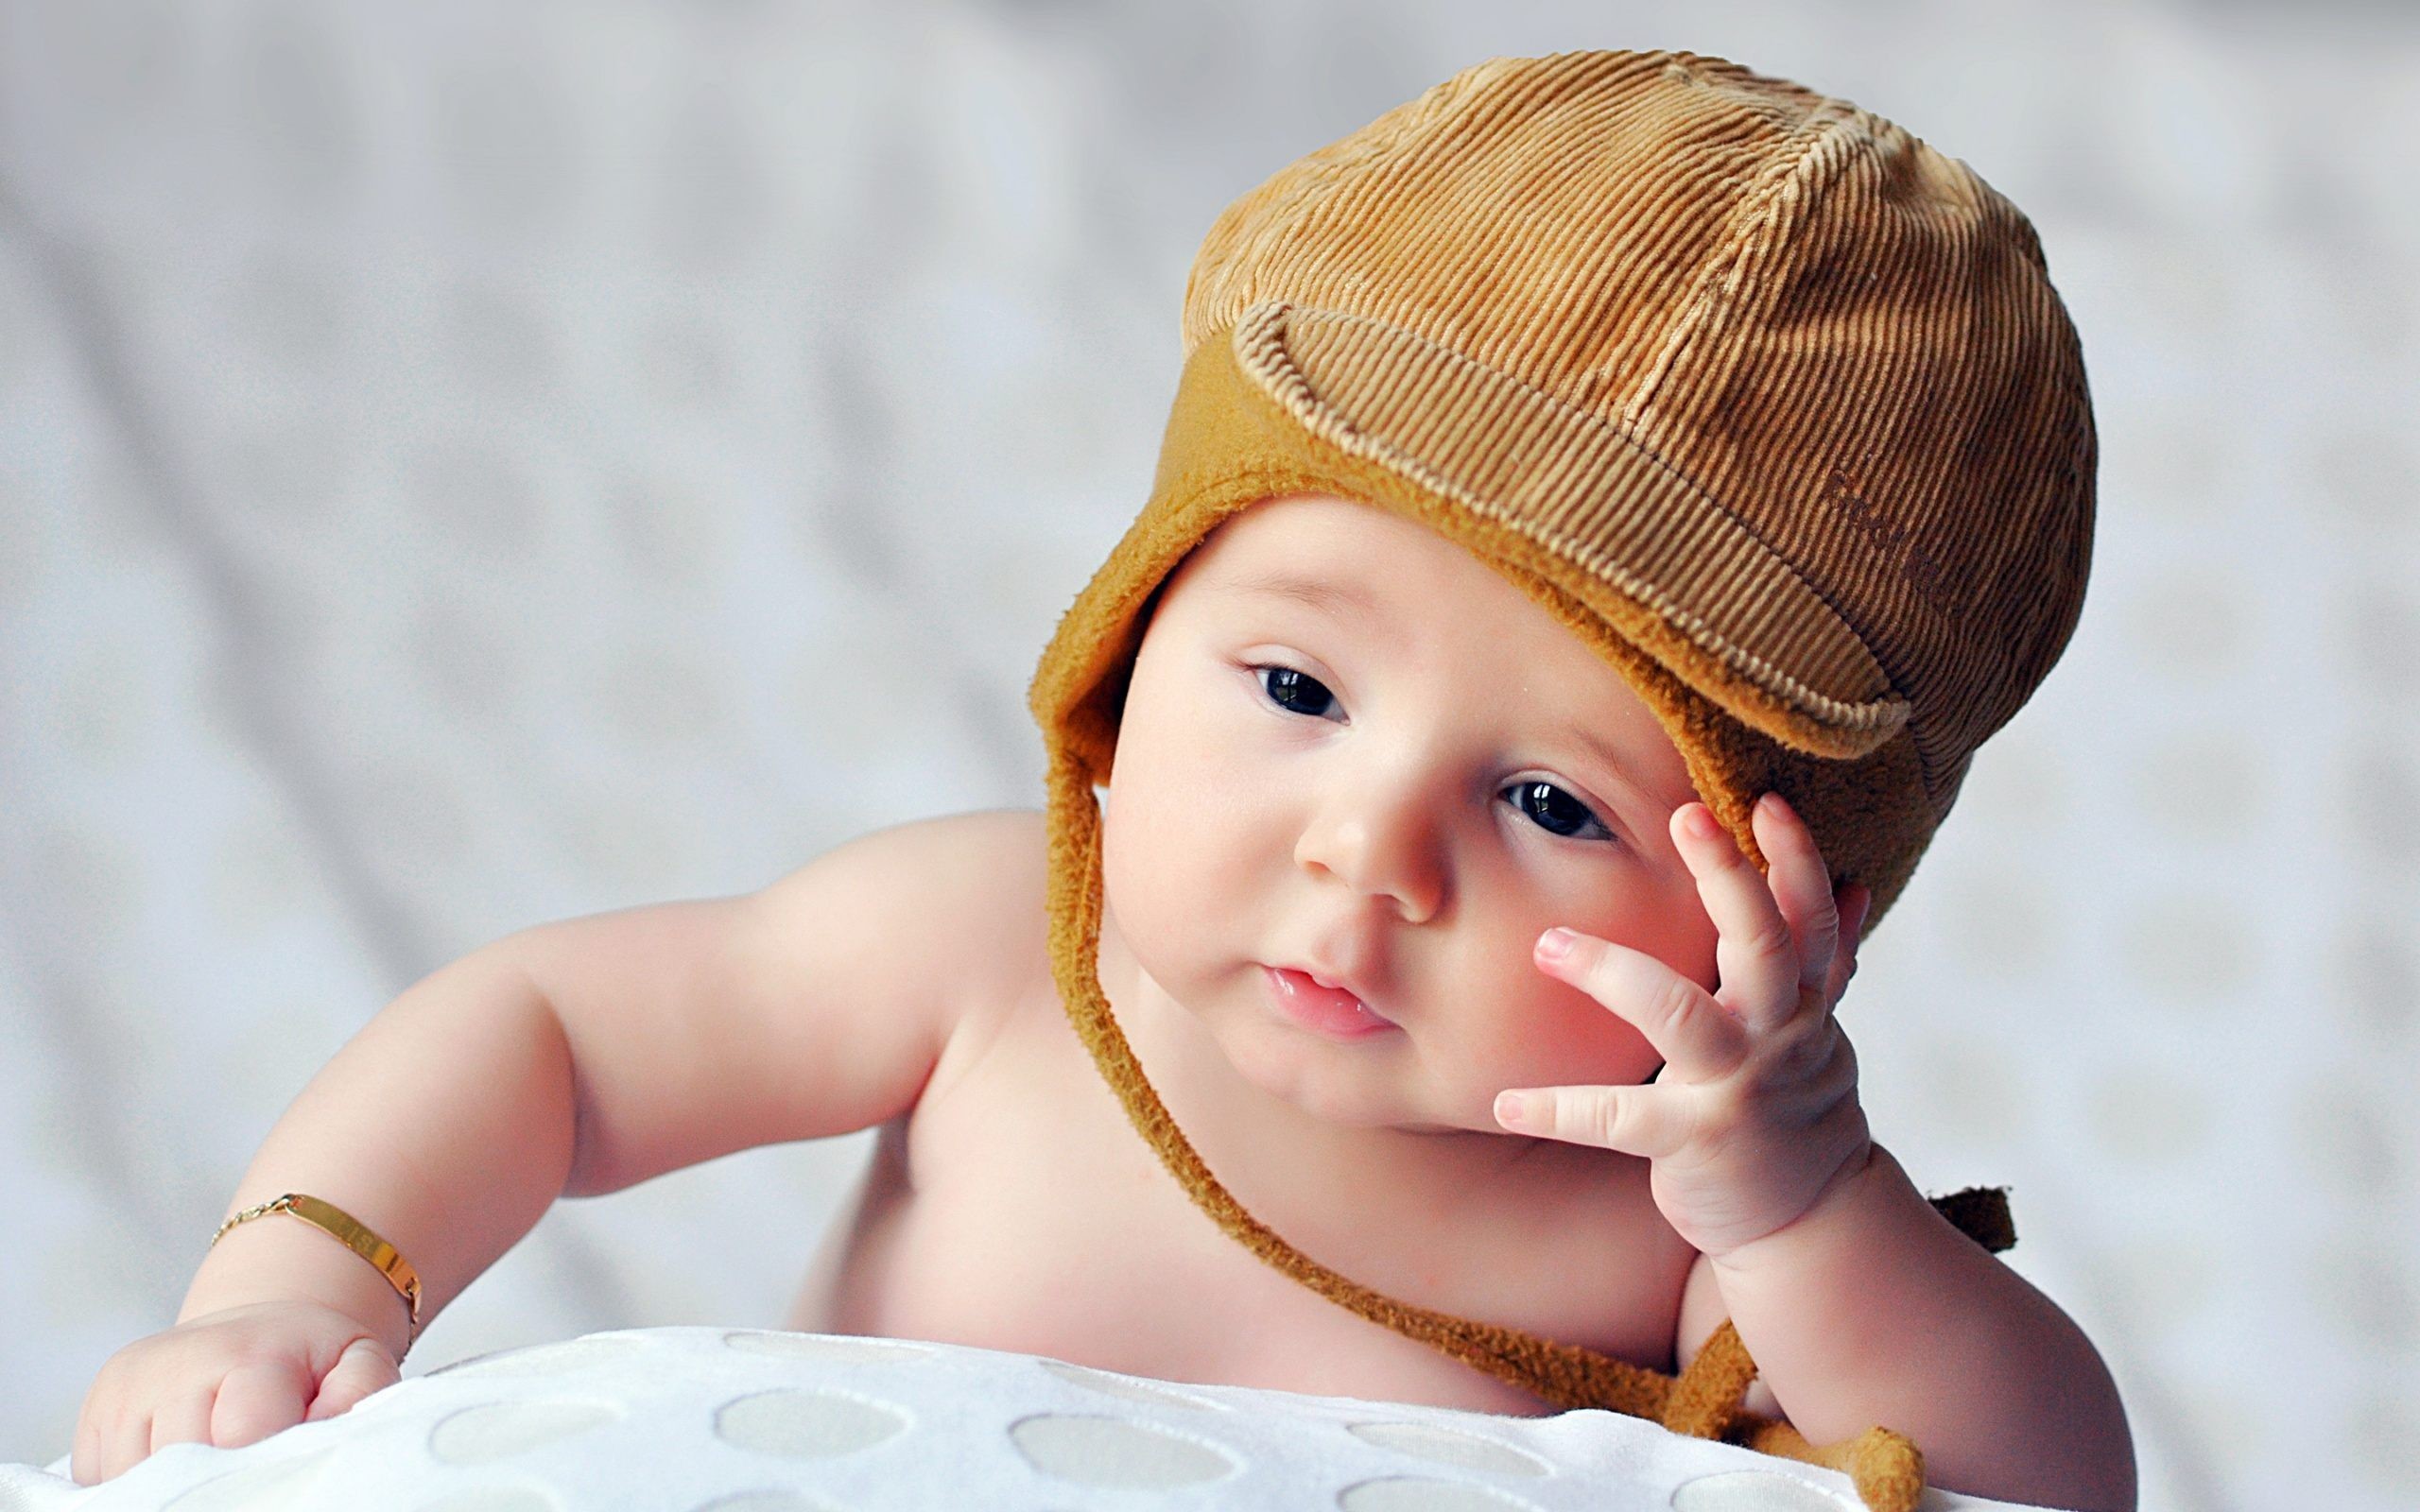 2560x1600 Infant Baby Wallpaper HD Free Download Of Cute Baby